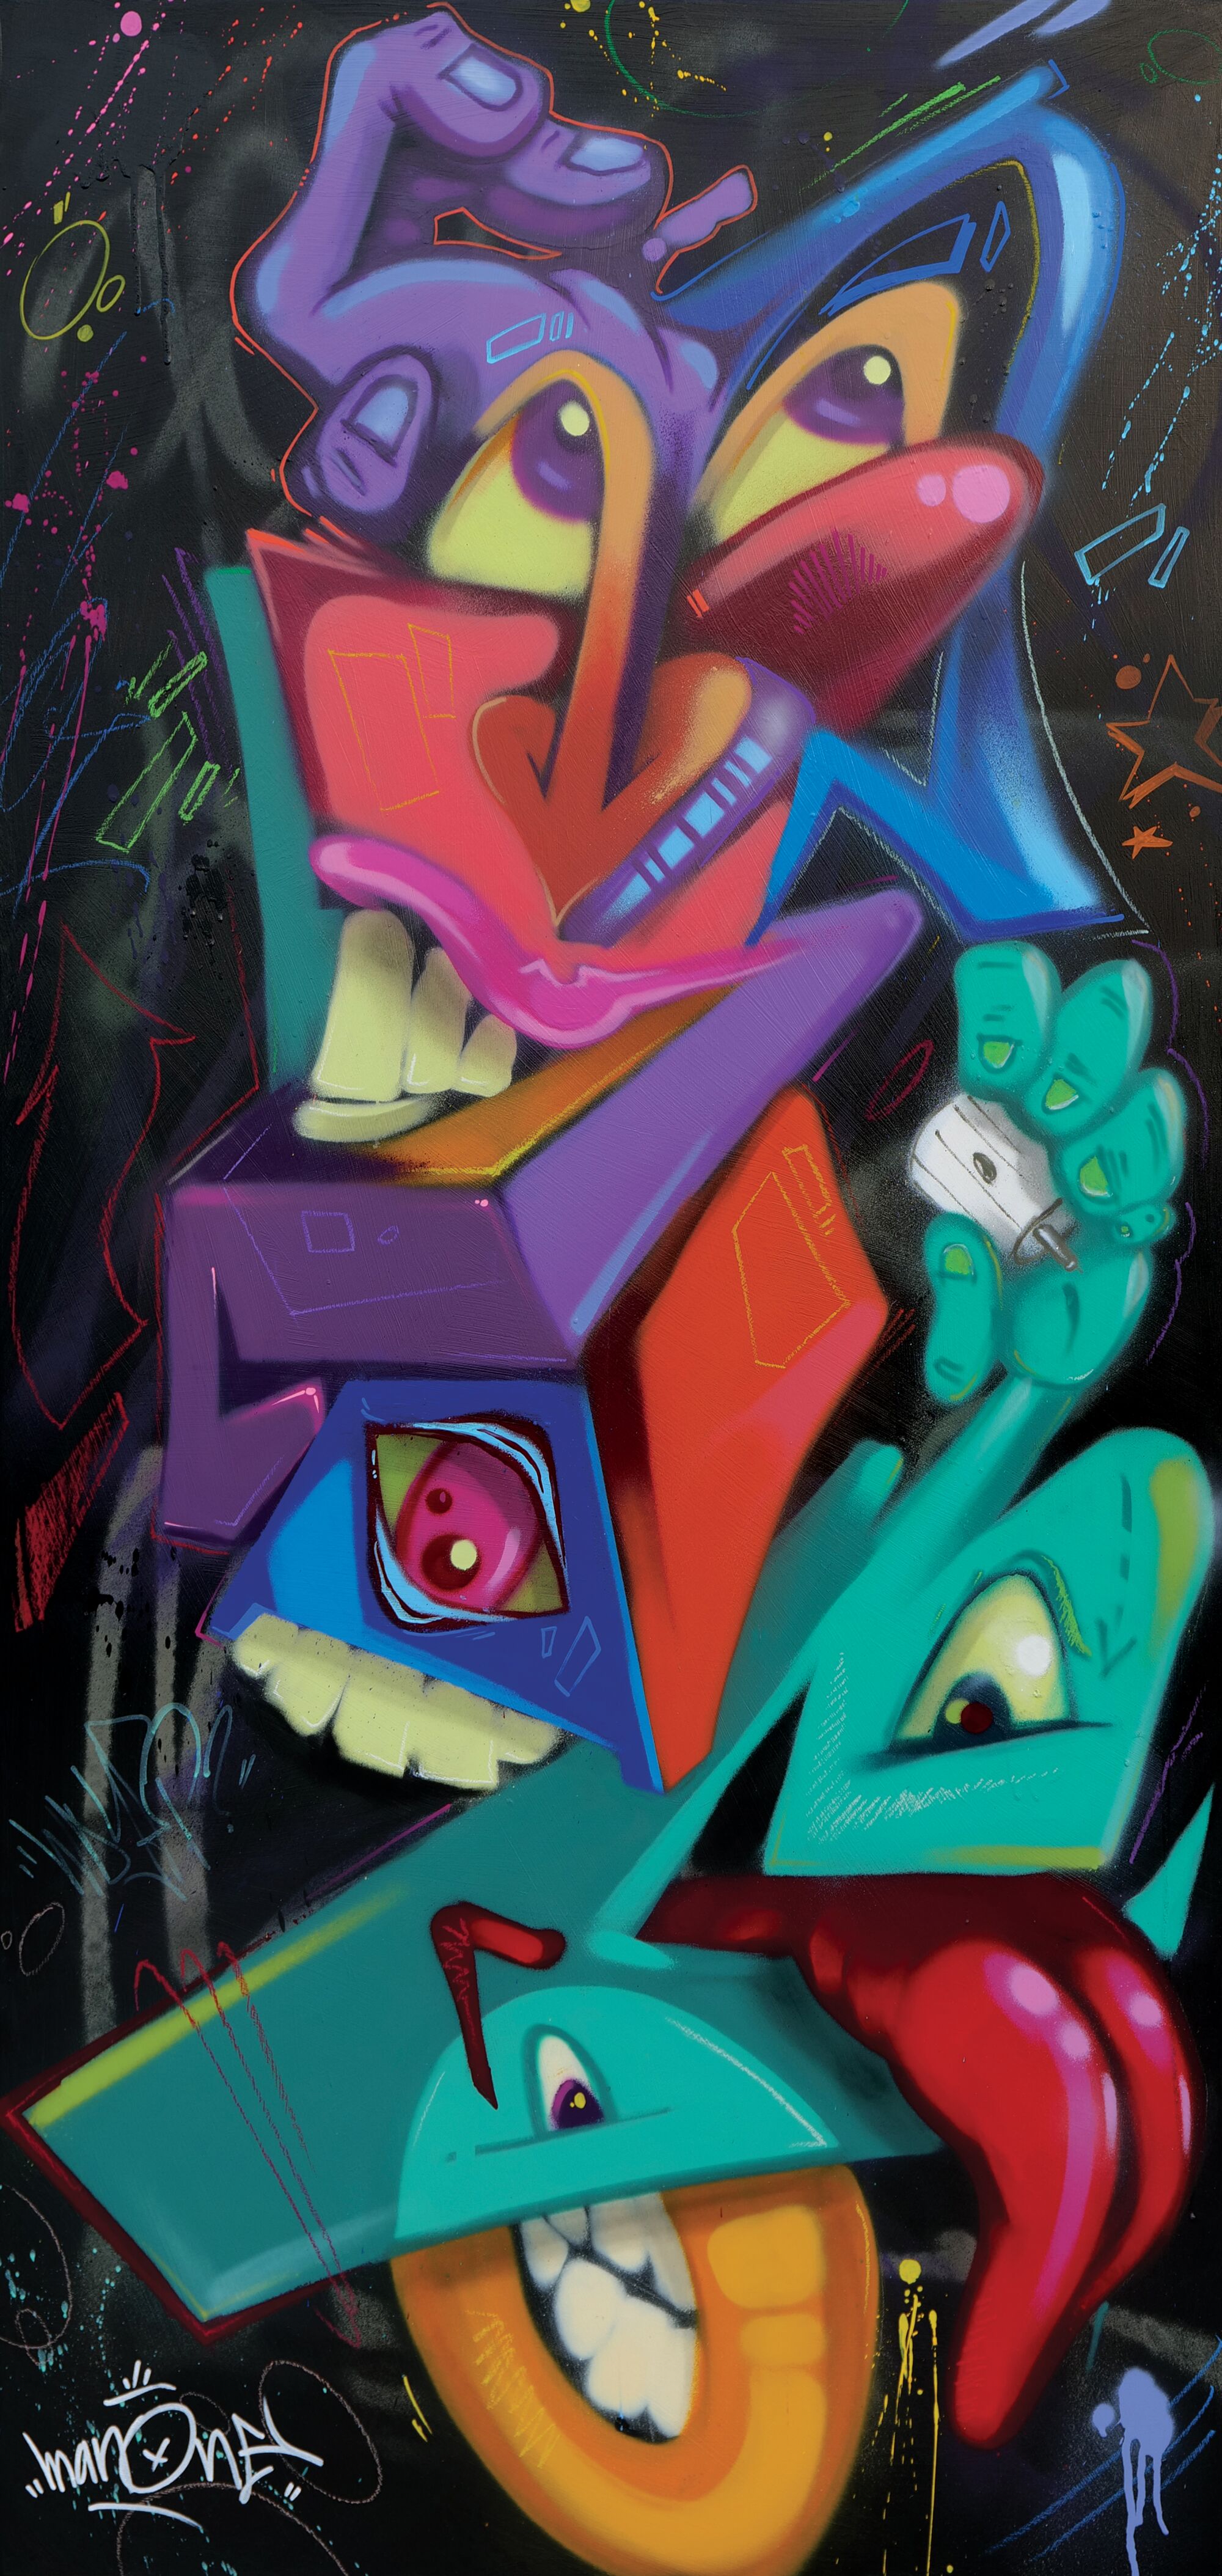  A graffiti-style artwork, a colorful work on a black background.